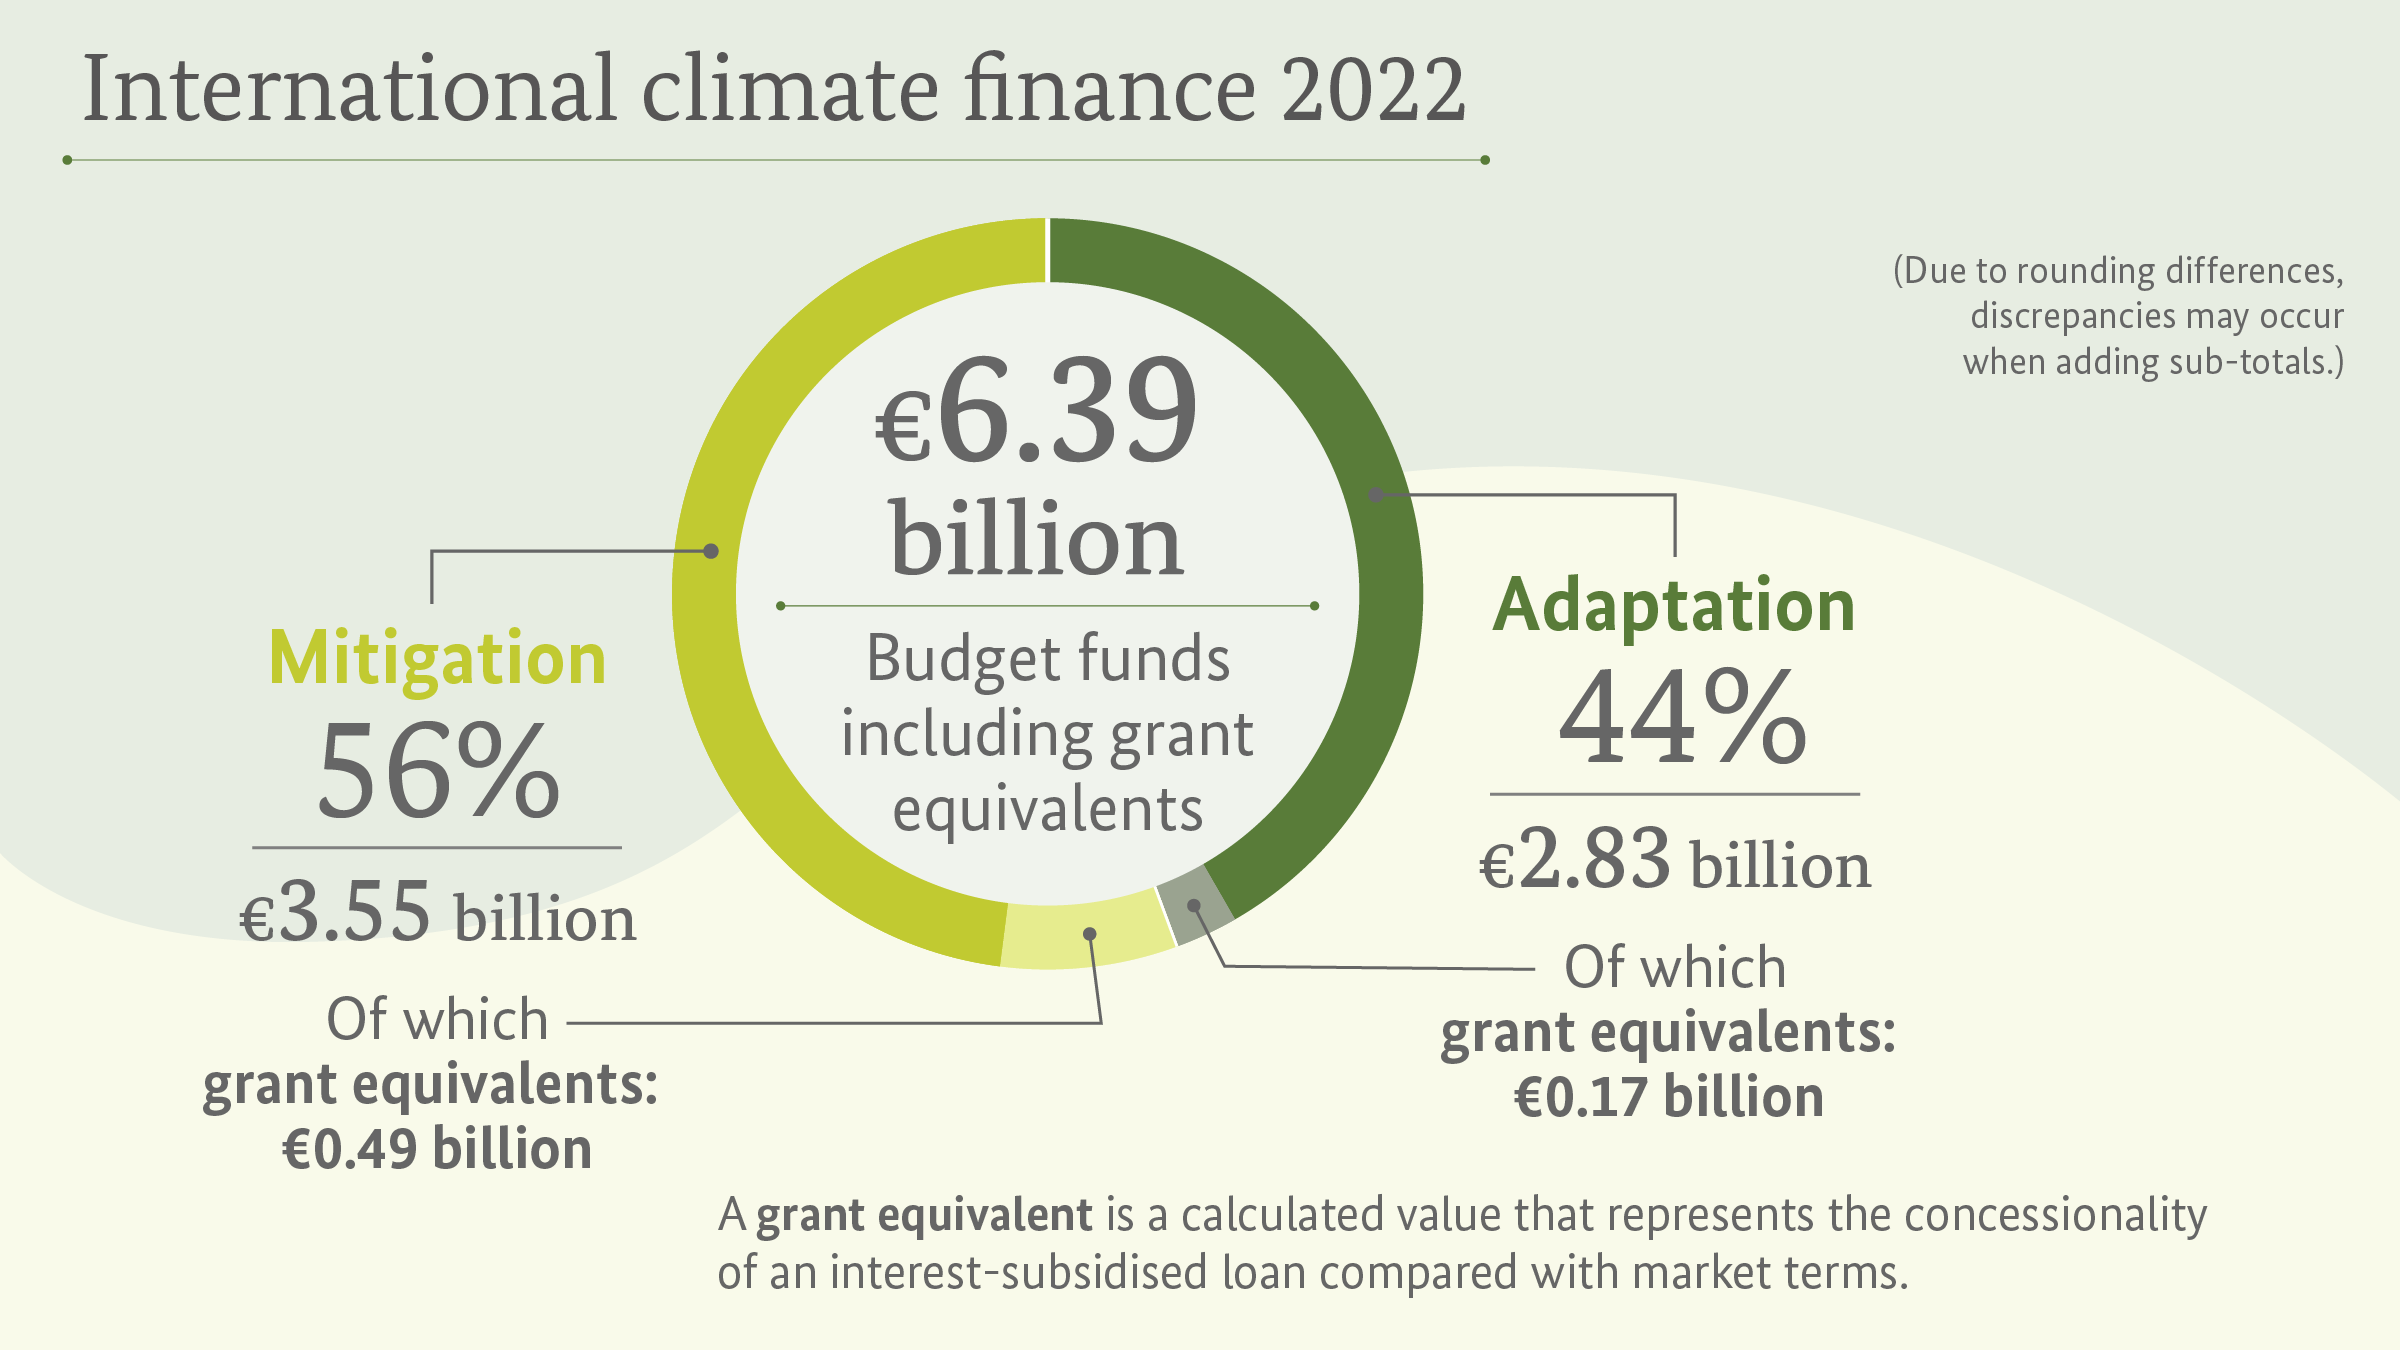 International climate finance 2022: Compared to 2021, climate financing from budget funds has been increased by around one billion euros. It is a declared goal of the German government that the provision of financial resources should aim to achieve a balance between adaptation and mitigation activities. This goal was largely attained in 2022. In that year, mitigation accounted for 56 per cent and adaptation for 44 per cent. 